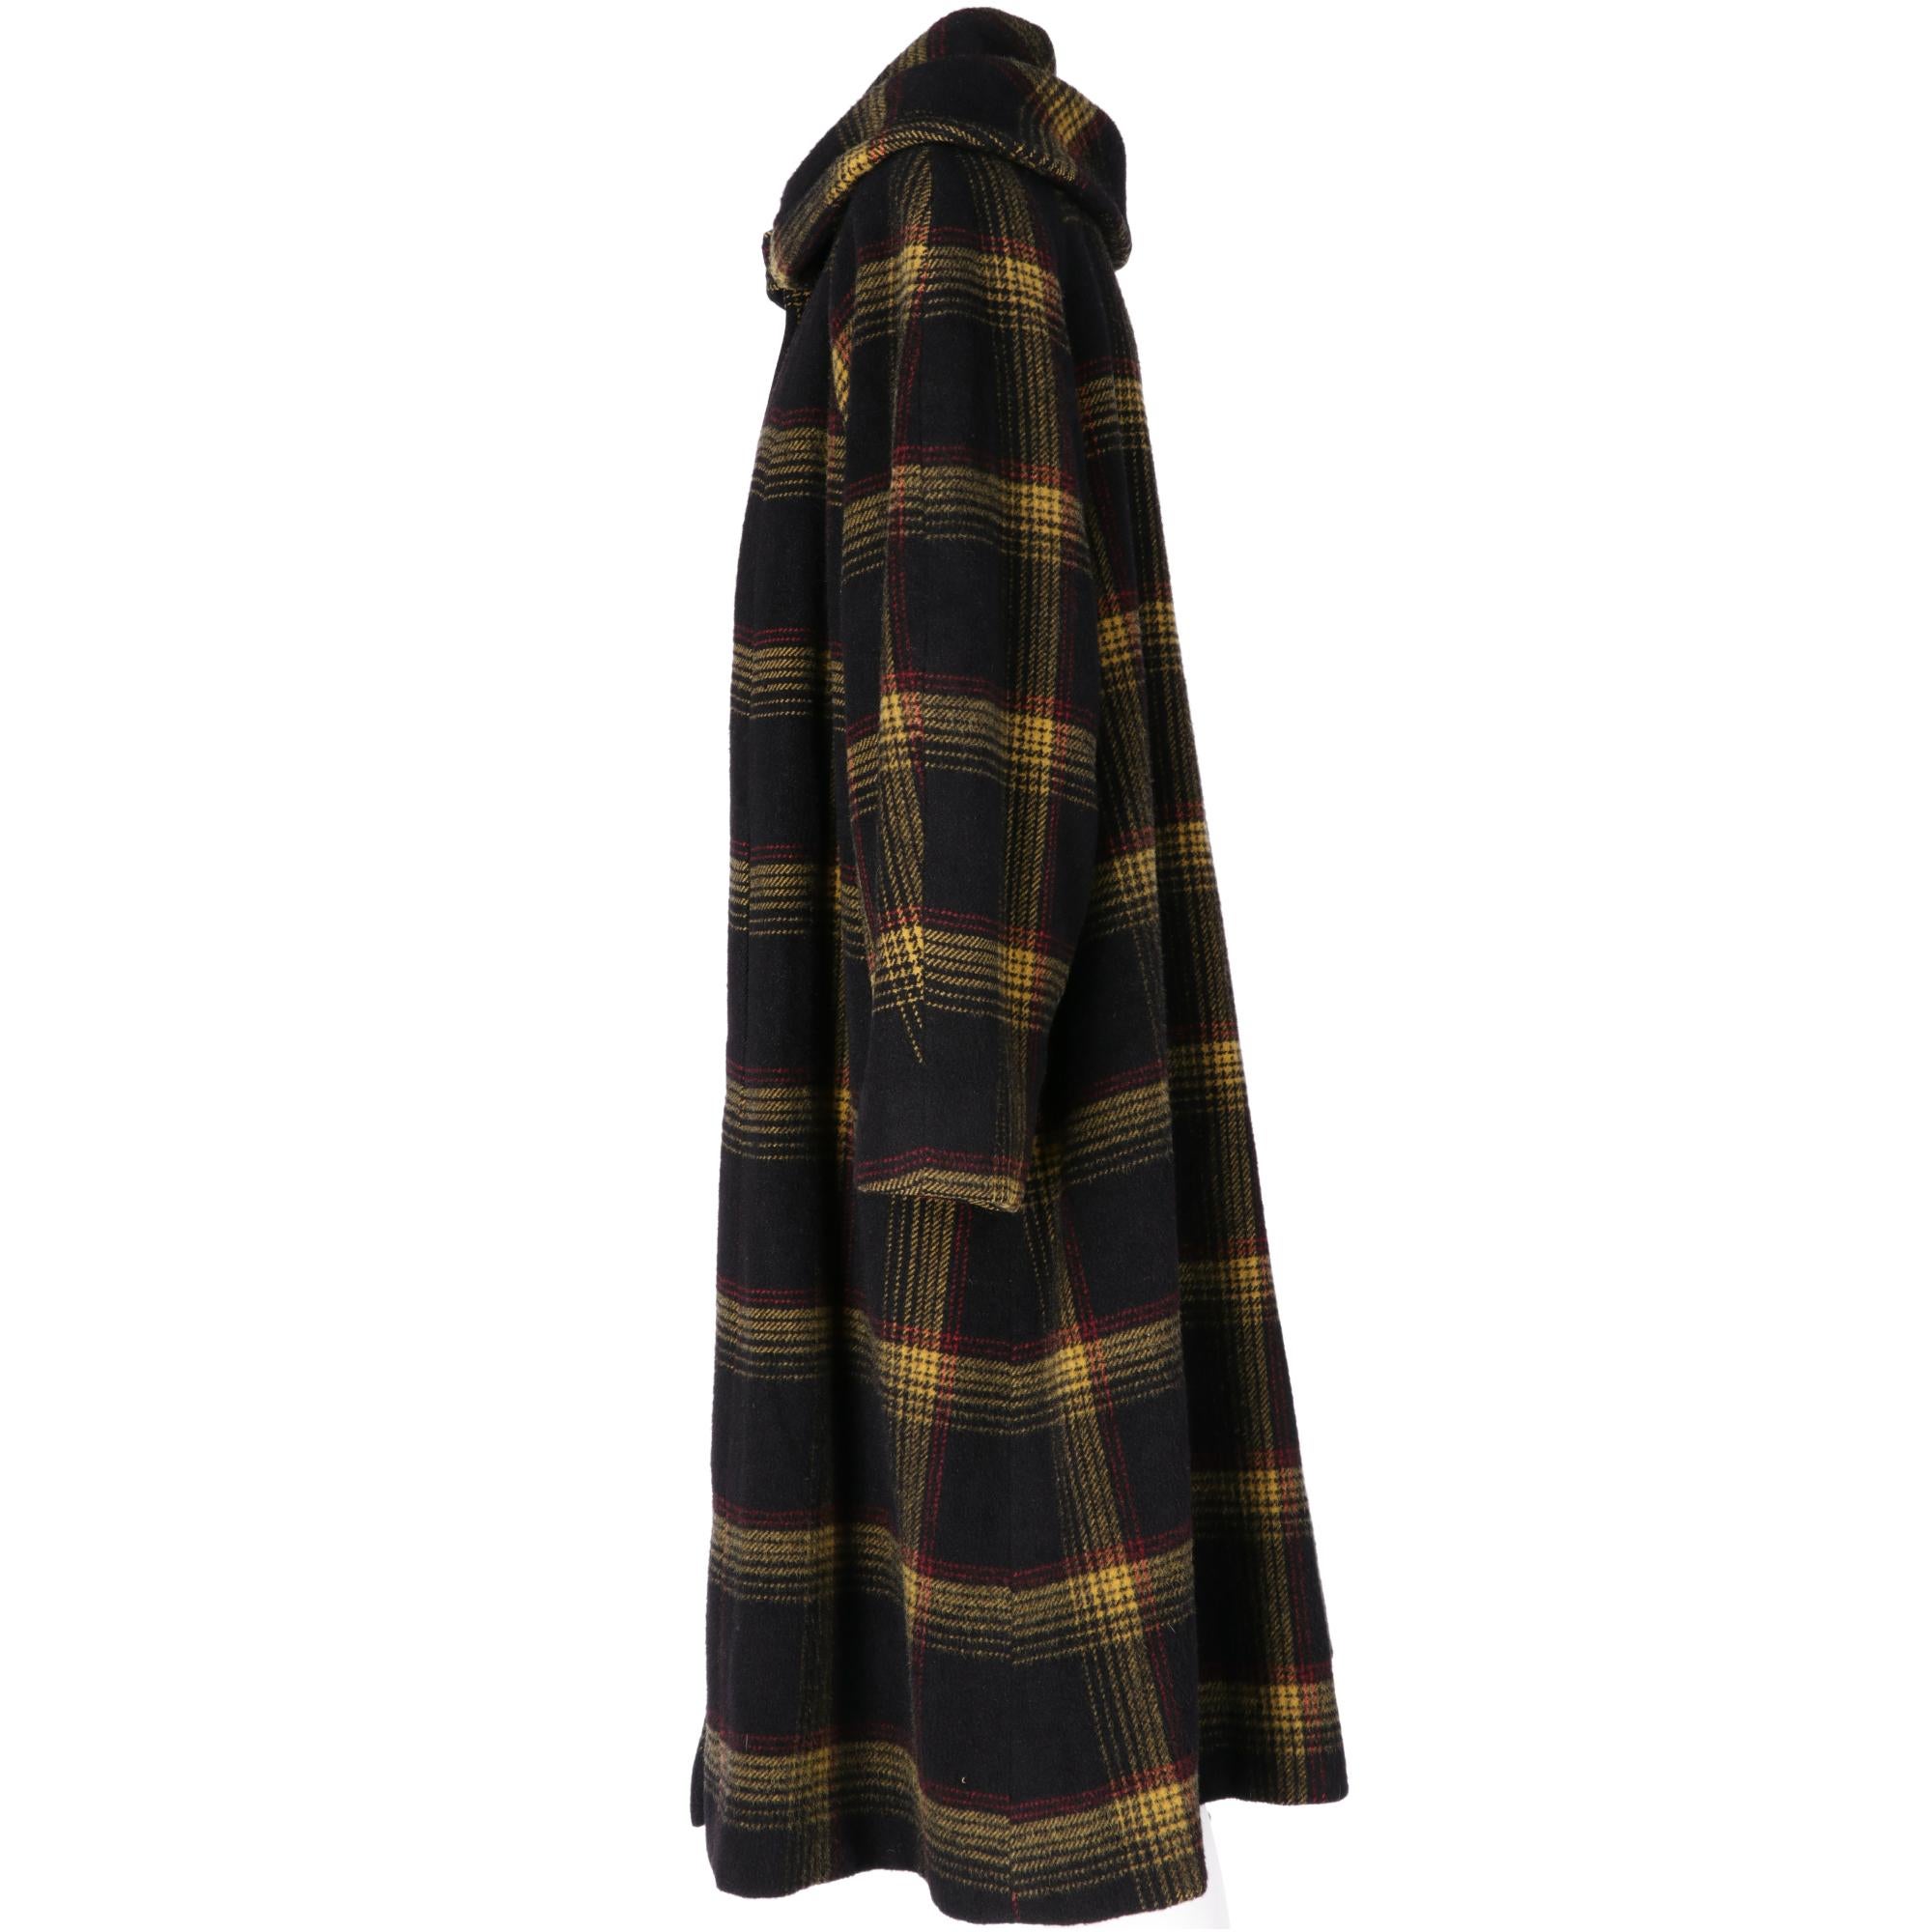 Medium-length black coat with yellow and red tartan pattern, wide collar, front closure with two large beige buttons, long sleeves and welt pockets. Lined interior.

Years: 50s

Made in Italy

Size: 44 IT

Linear measures

Height: 102 cm
Bust: 60